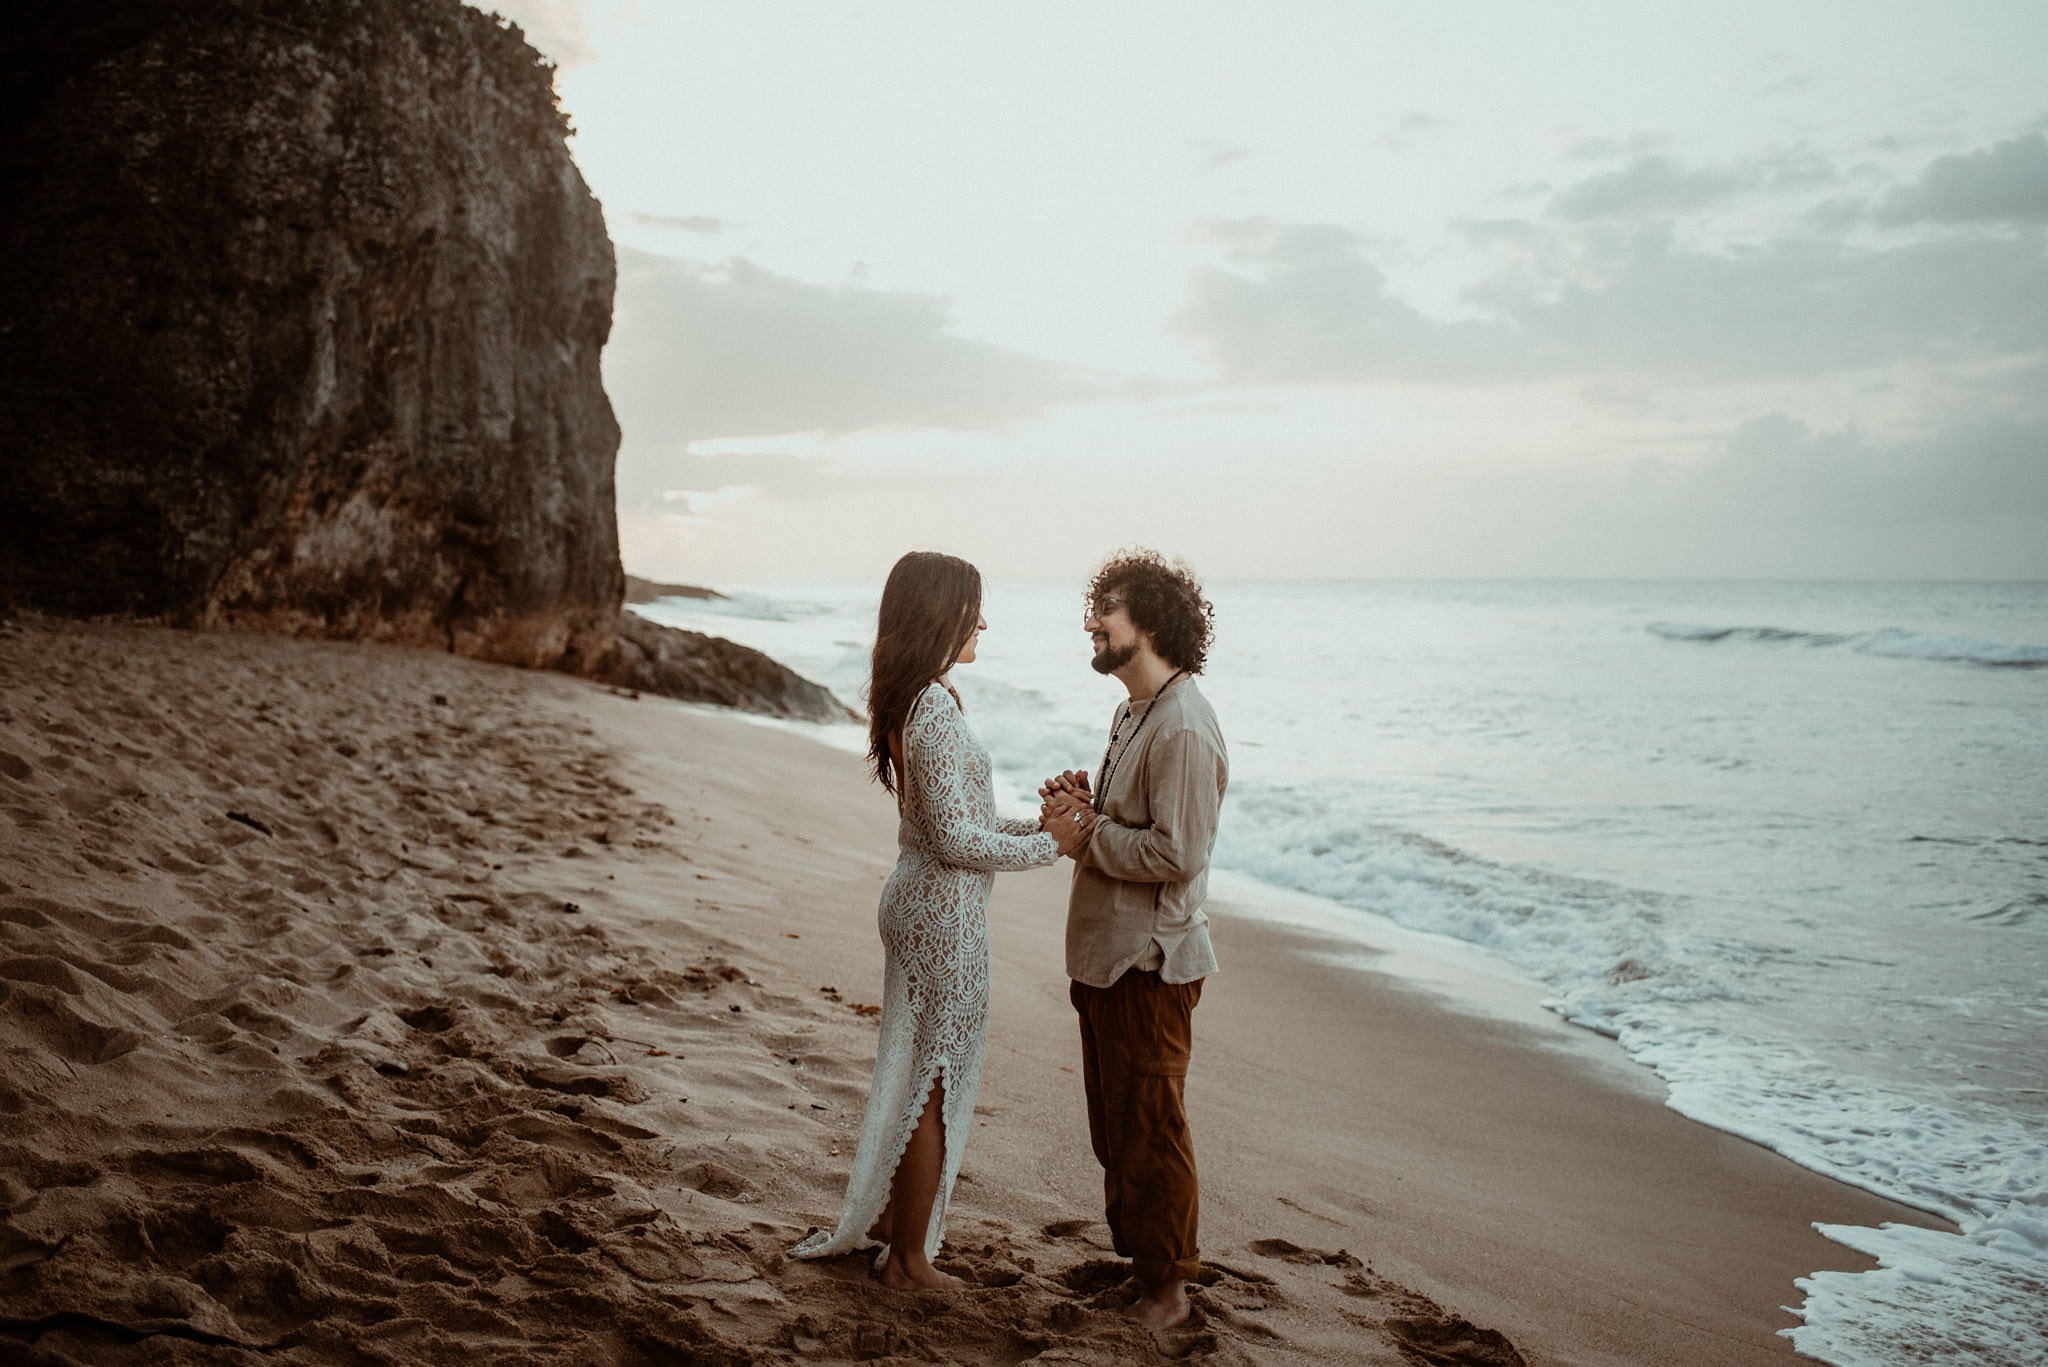 How To Plan a DIY Elopement Ceremony